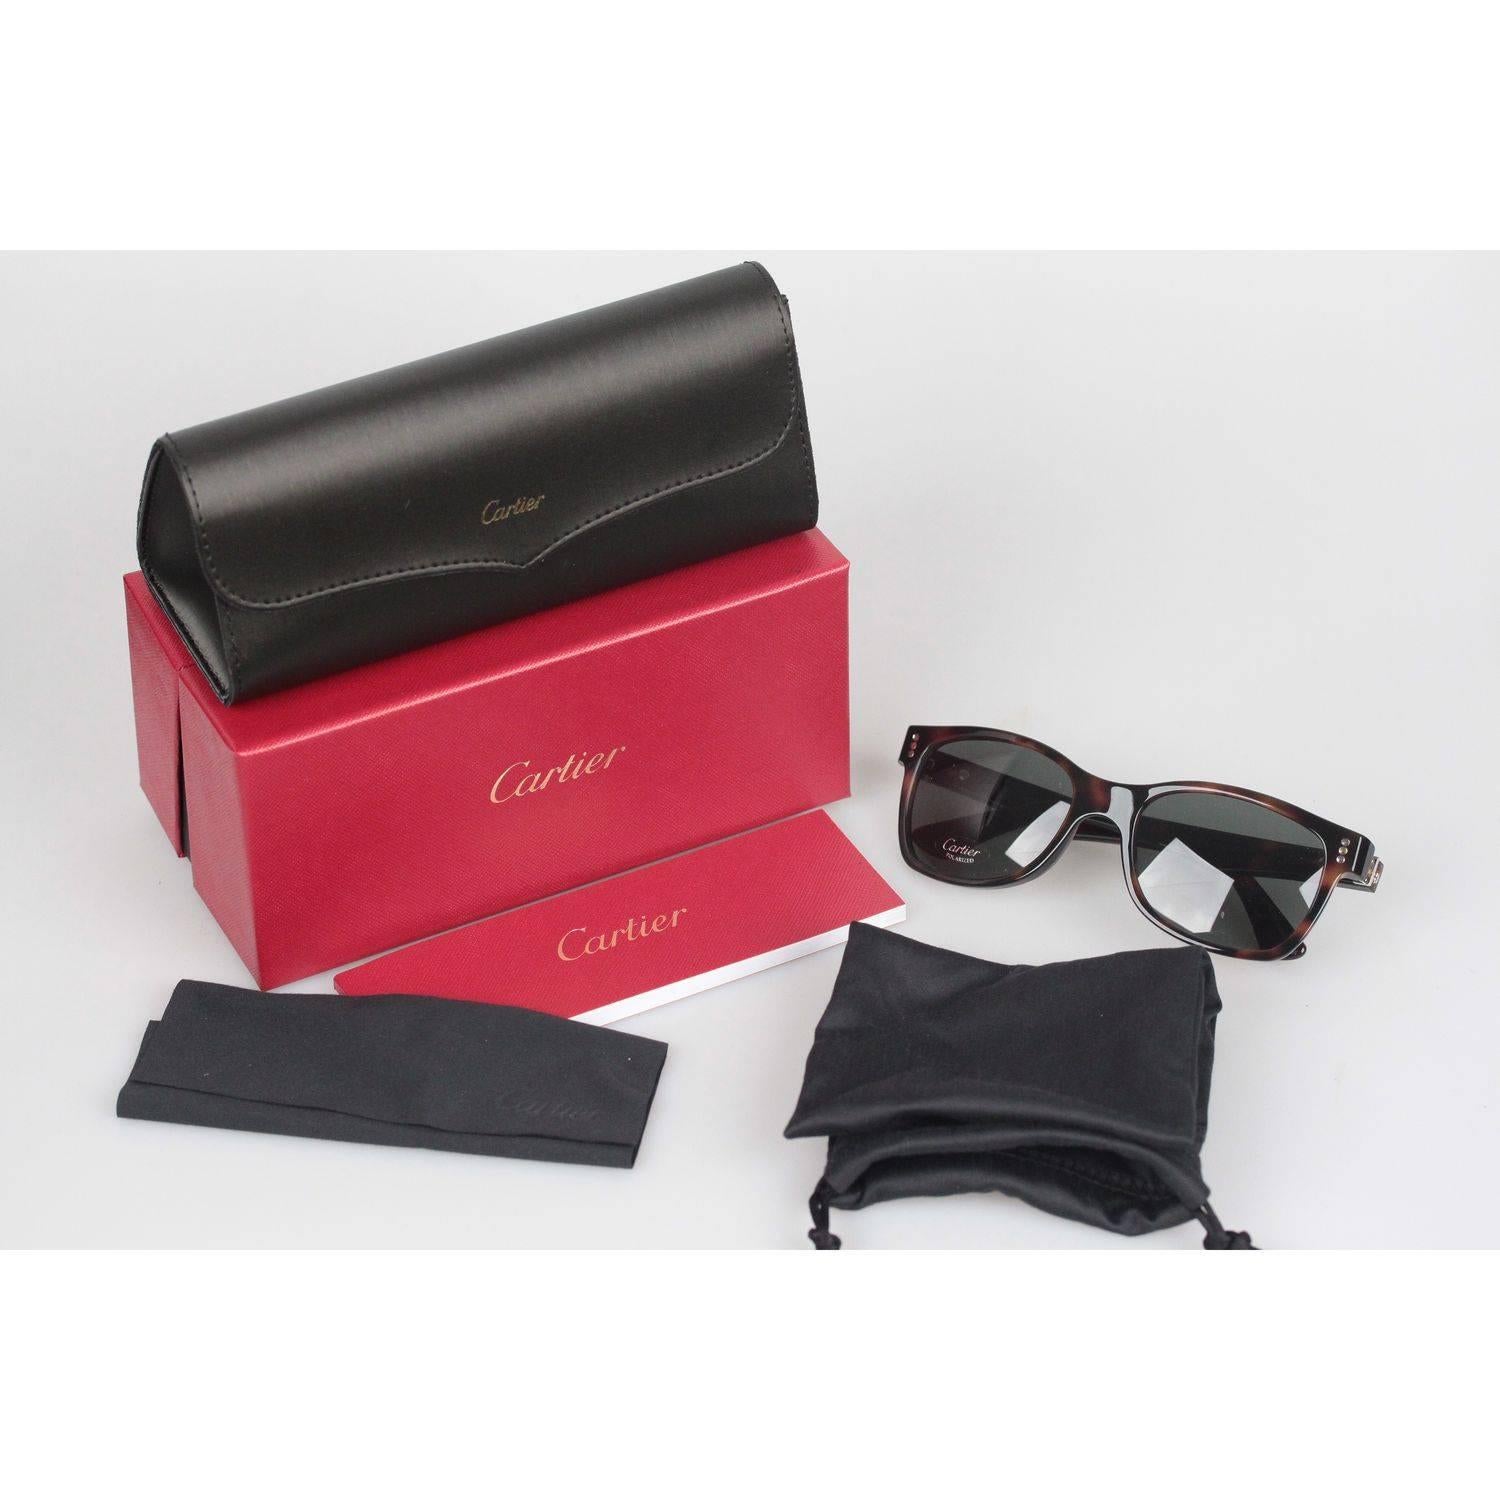 Classic and Elegant Rectangular Sunglasses by Cartier
Brown, tortoise look frame
Hand Made in France
White Gold Finish

Measurements:
- TEMPLE MAX. LENGTH: 135 mm
- TEMPLE TO TEMPLE - MAX WIDTH: 135 mm
- EYE / LENS MAX. WIDTH: 54 mm
- EYE / LENS